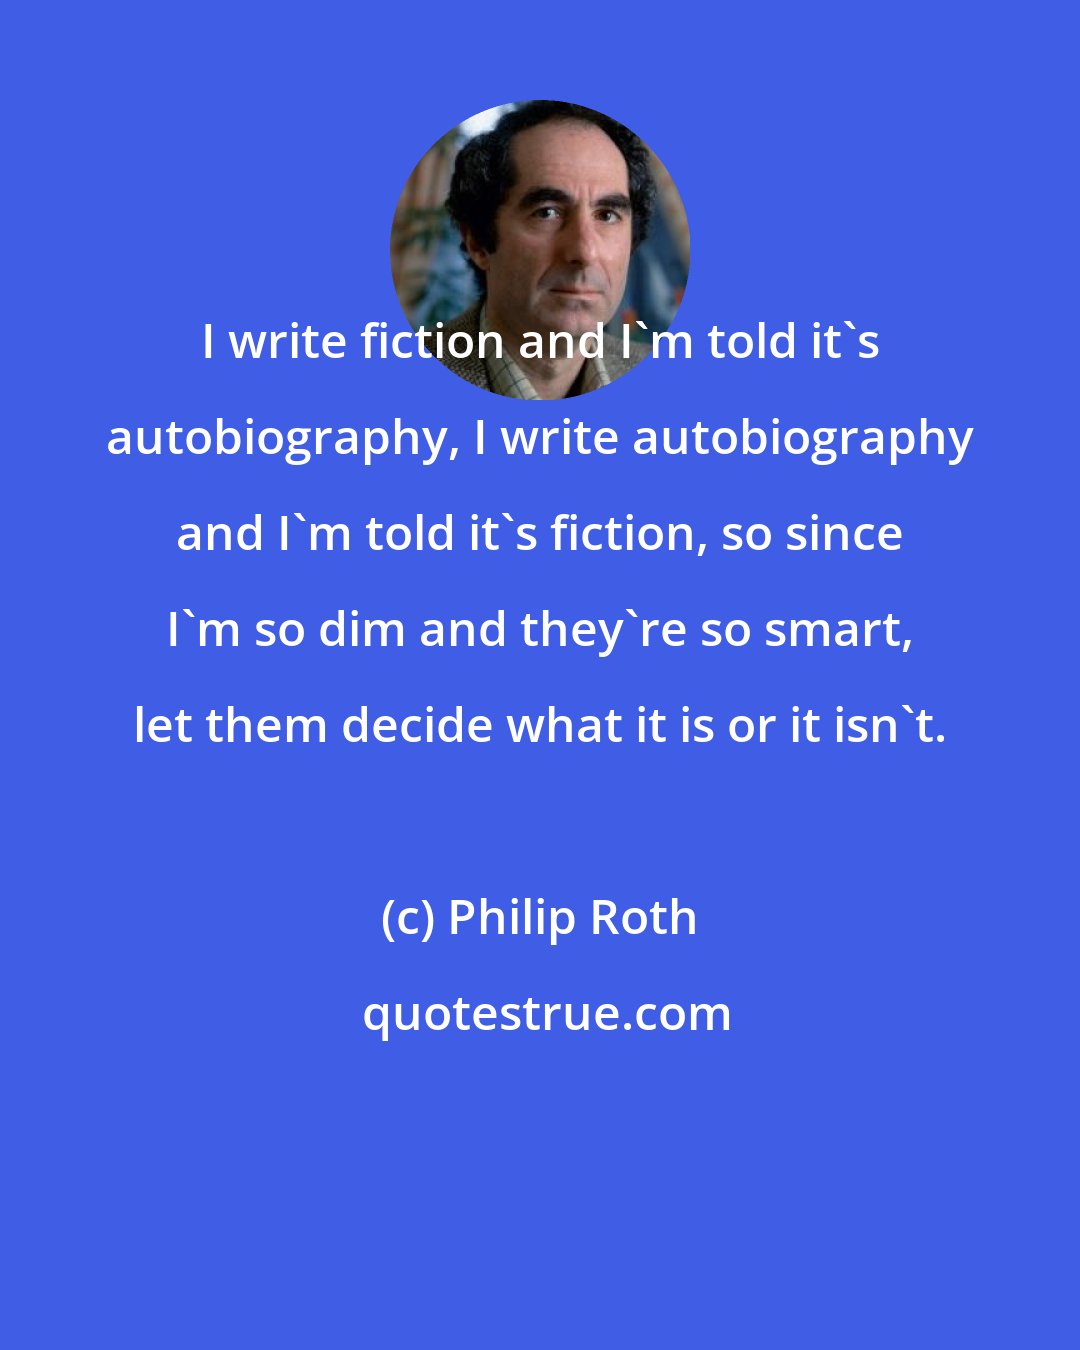 Philip Roth: I write fiction and I'm told it's autobiography, I write autobiography and I'm told it's fiction, so since I'm so dim and they're so smart, let them decide what it is or it isn't.